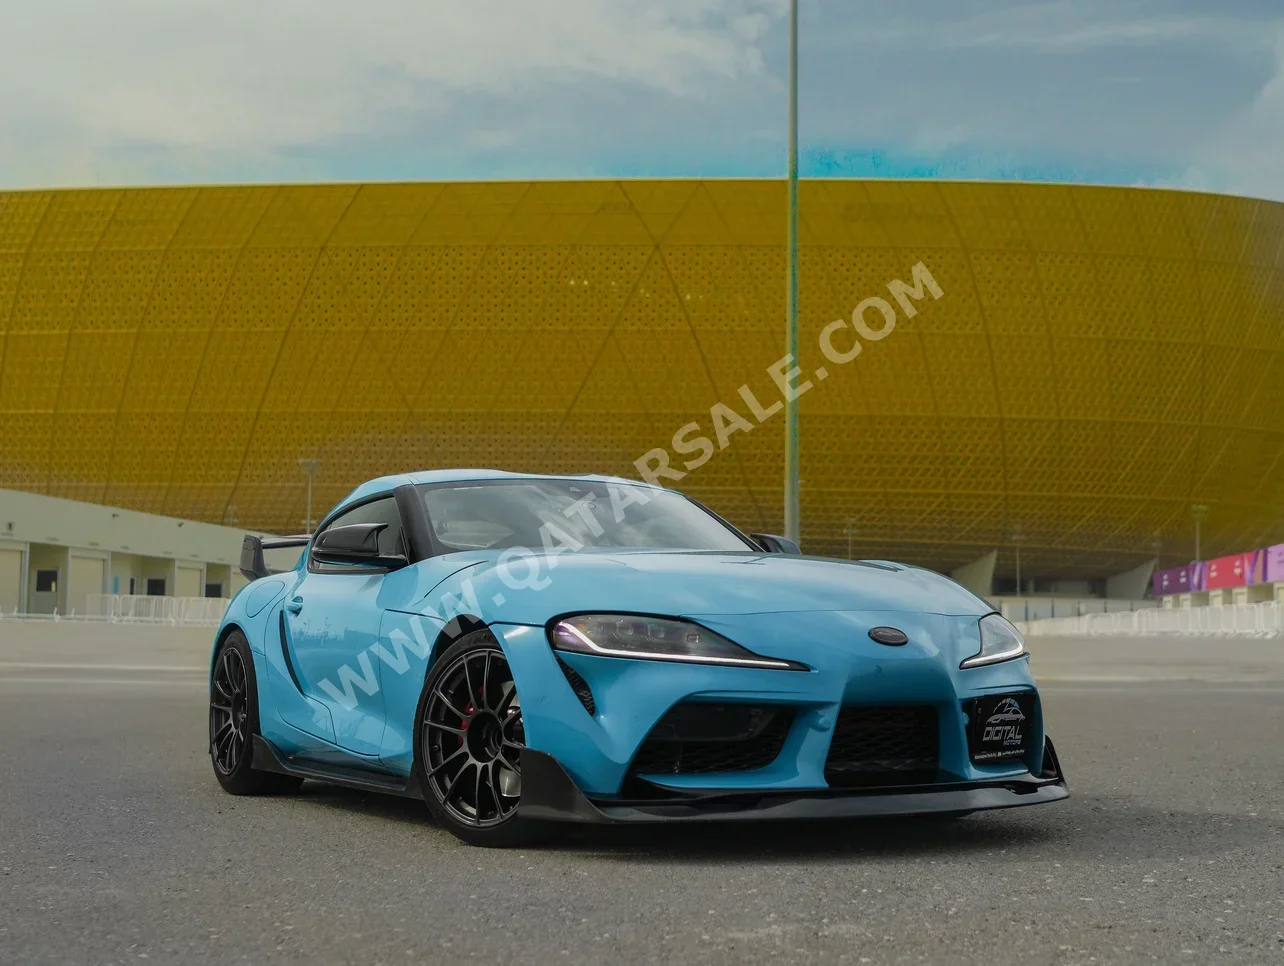 Toyota  Supra  2020  Automatic  33,000 Km  6 Cylinder  Rear Wheel Drive (RWD)  Coupe / Sport  Blue